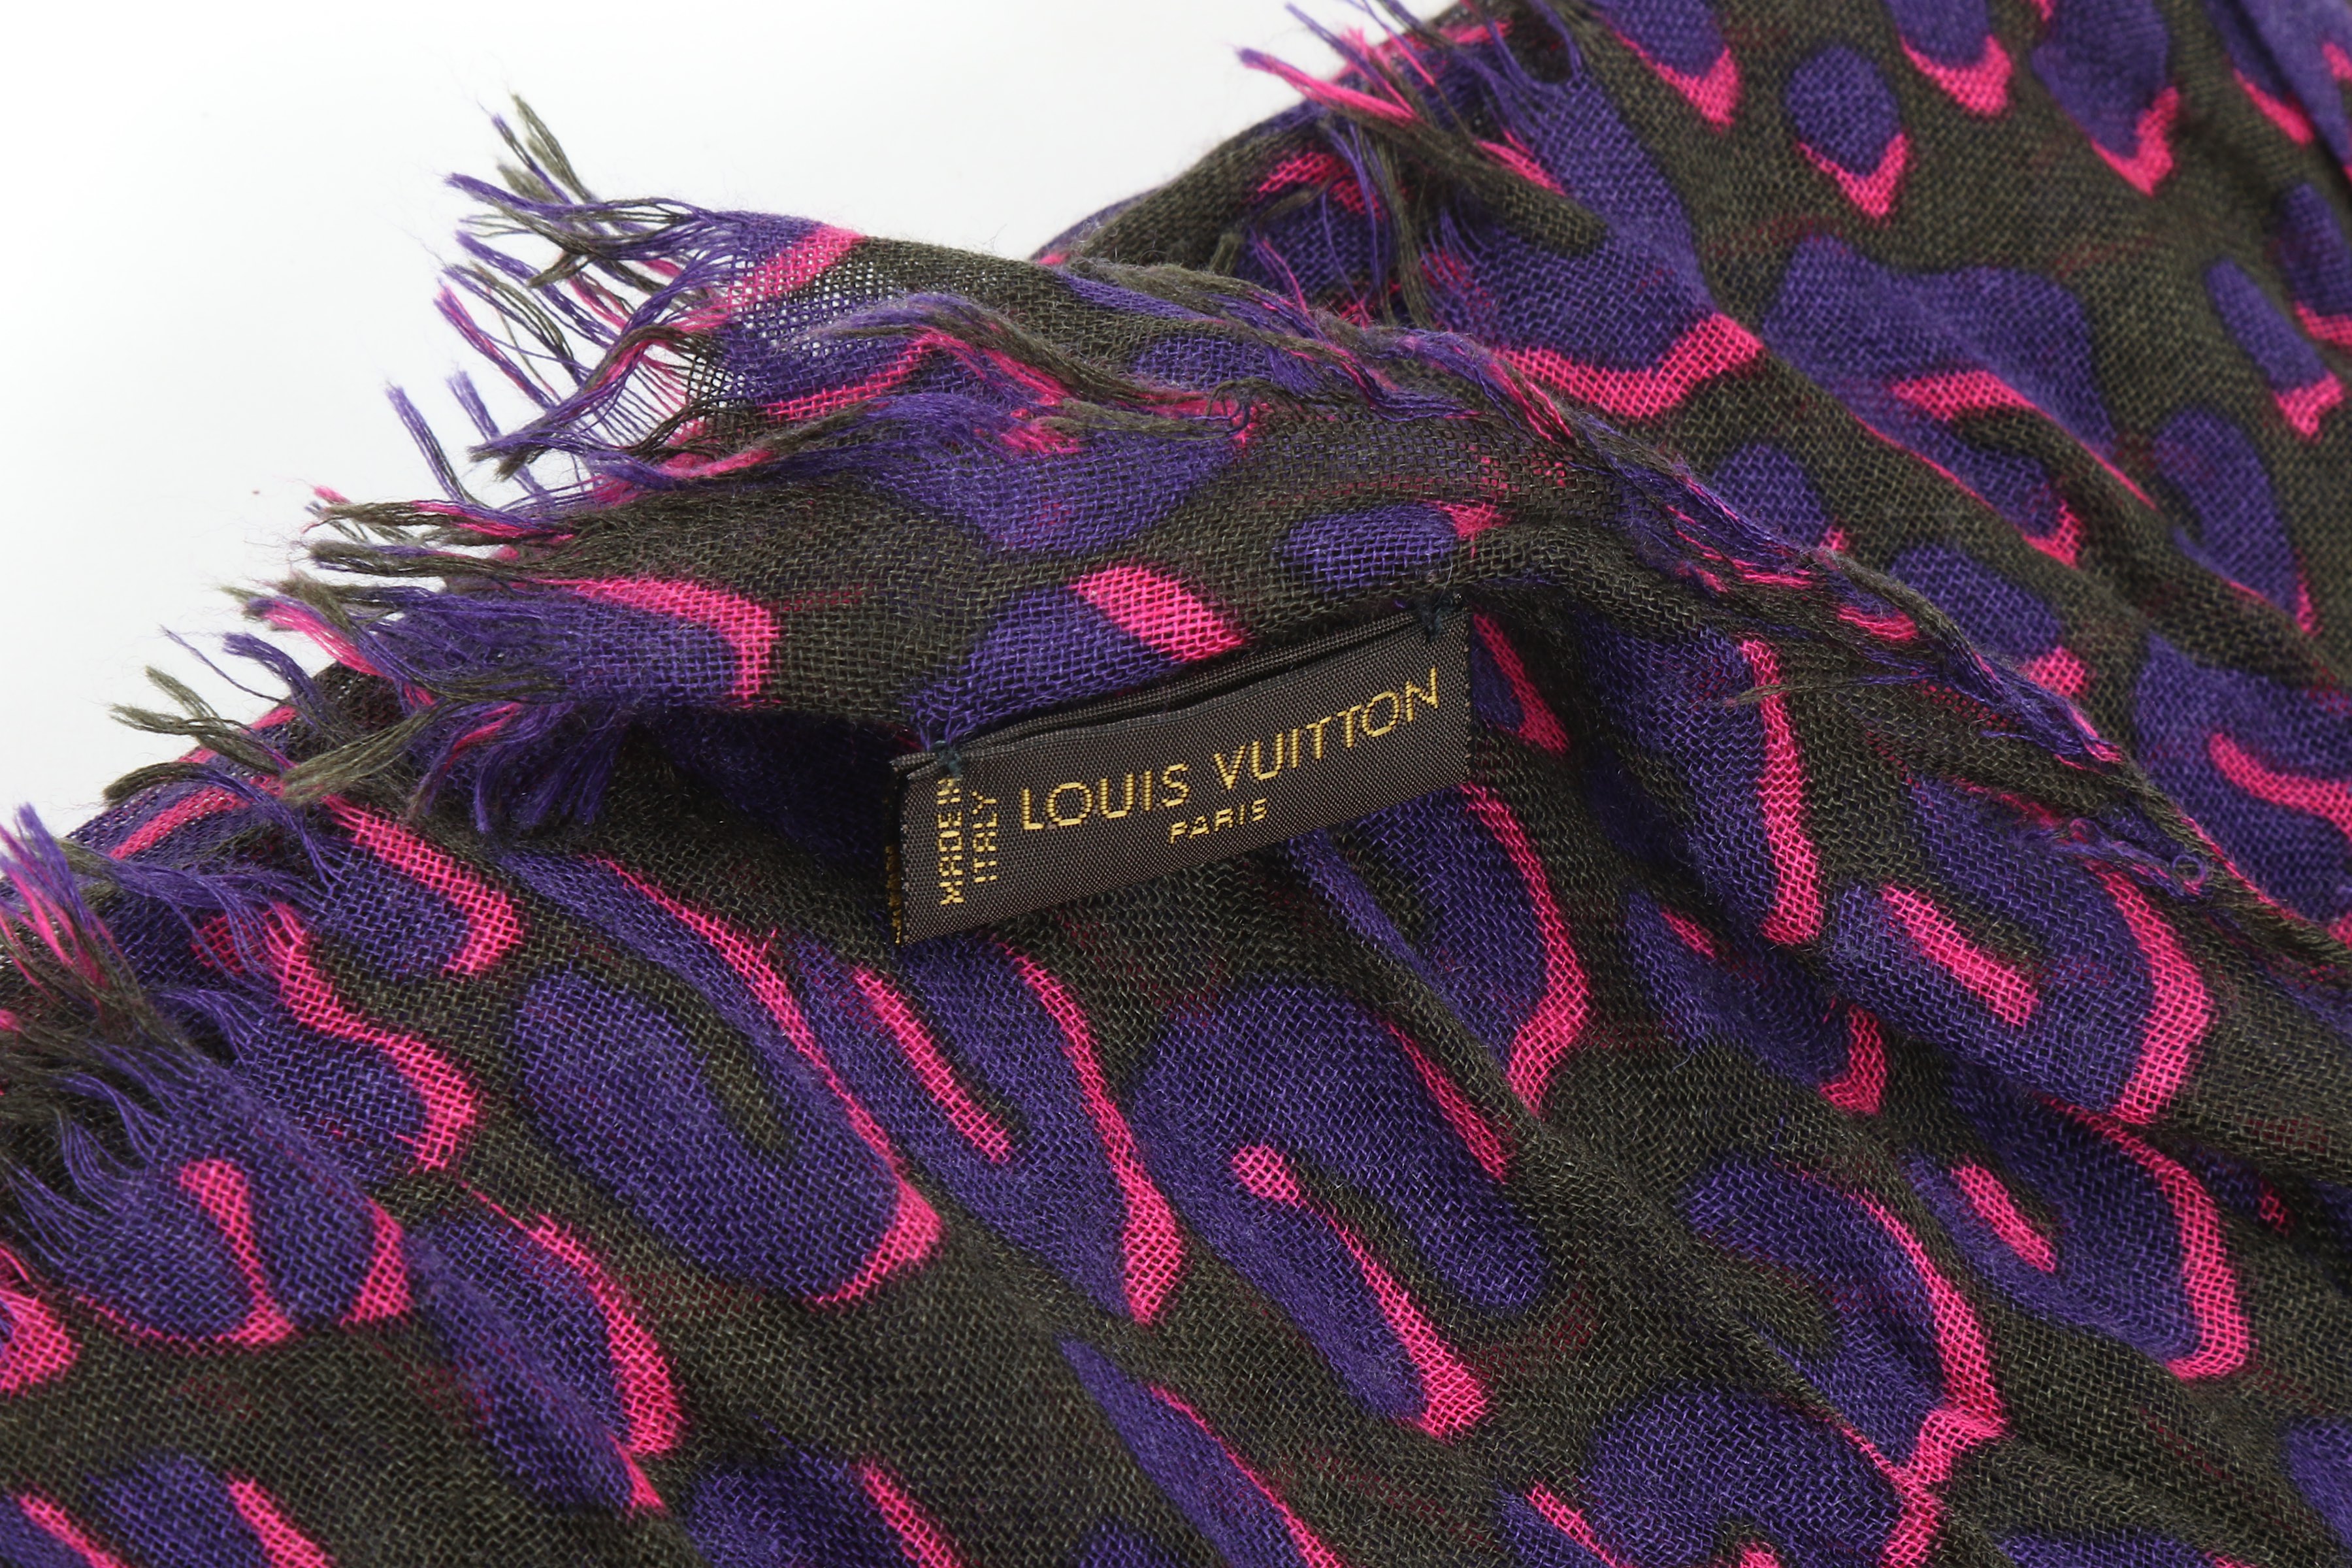 Louis Vuitton Stephen Sprouse Scarf, cashmere and silk mix with pink and purple design on black, - Image 3 of 3